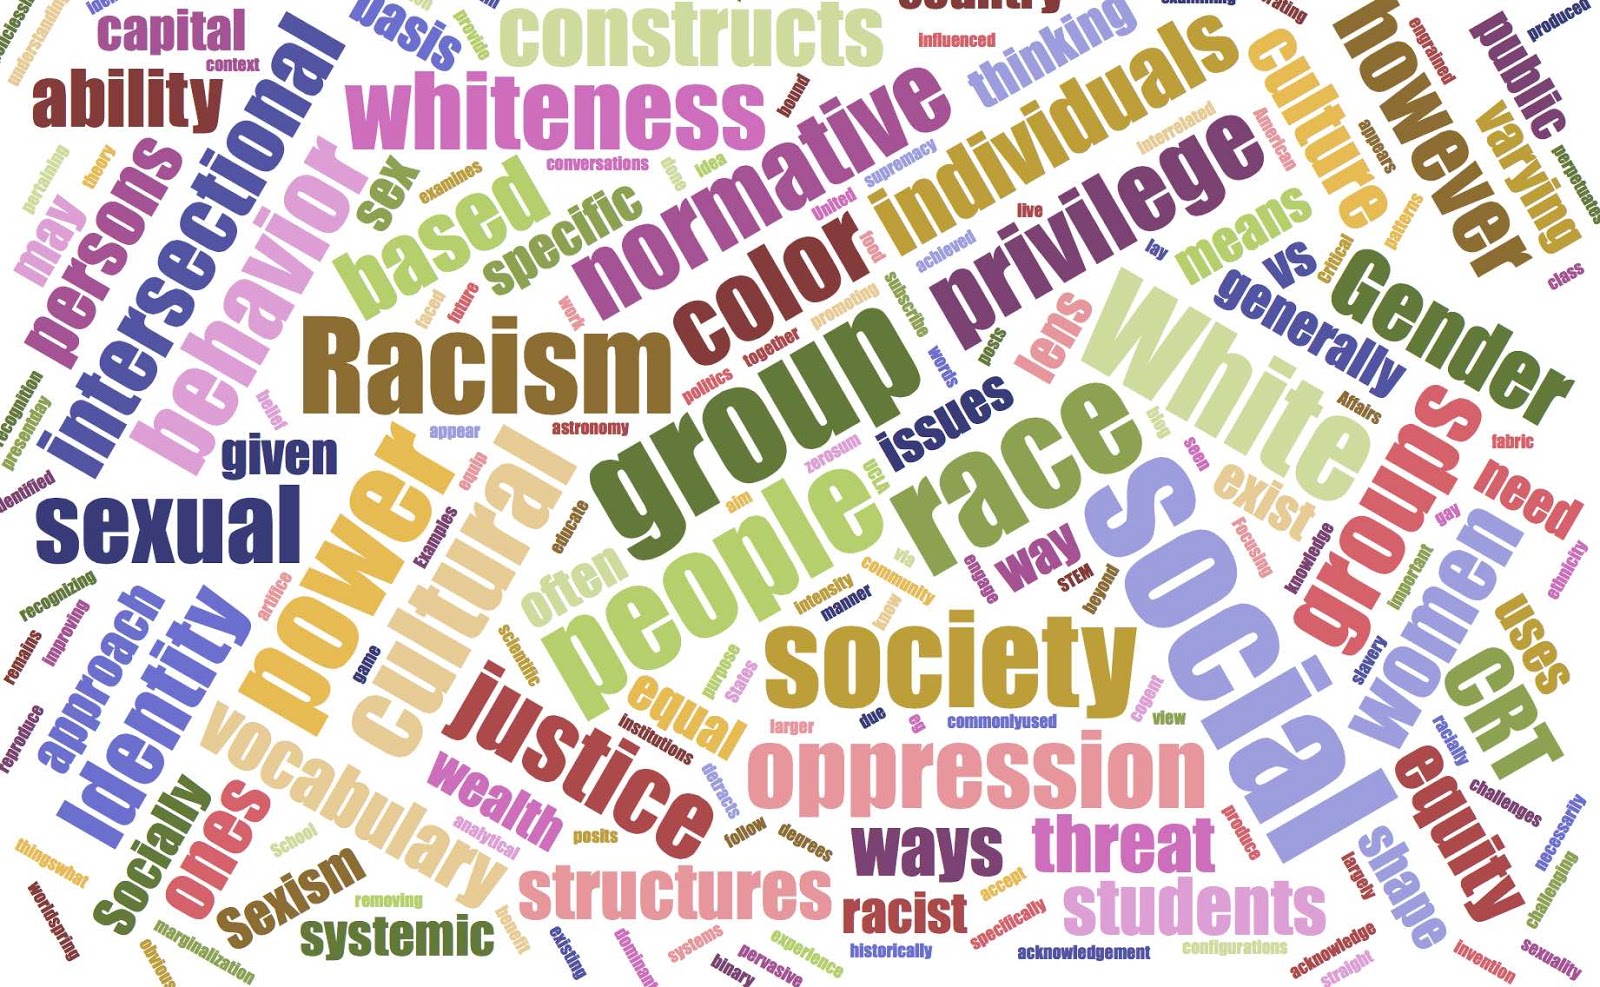 Word cloud in multiple colors and font sizes with a variety of terms related to social justice themes